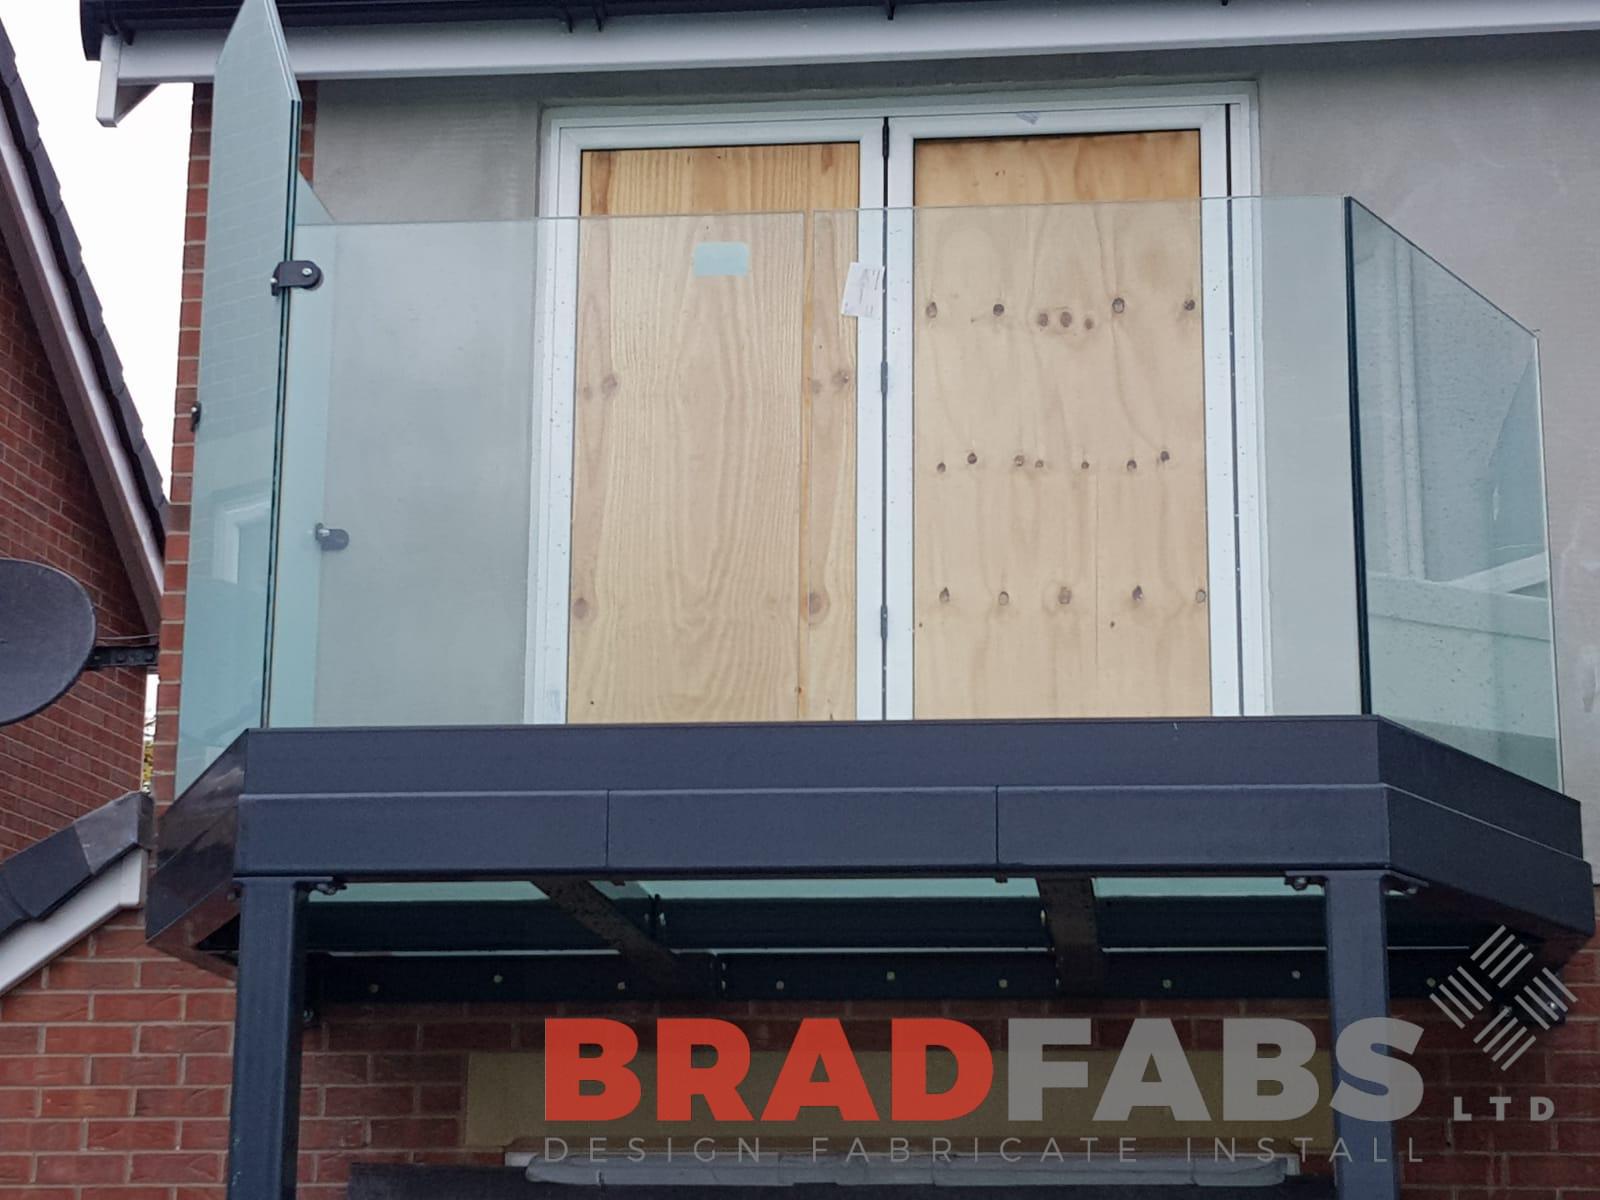 Infinity glass channel system, bespoke products by Bradfabs